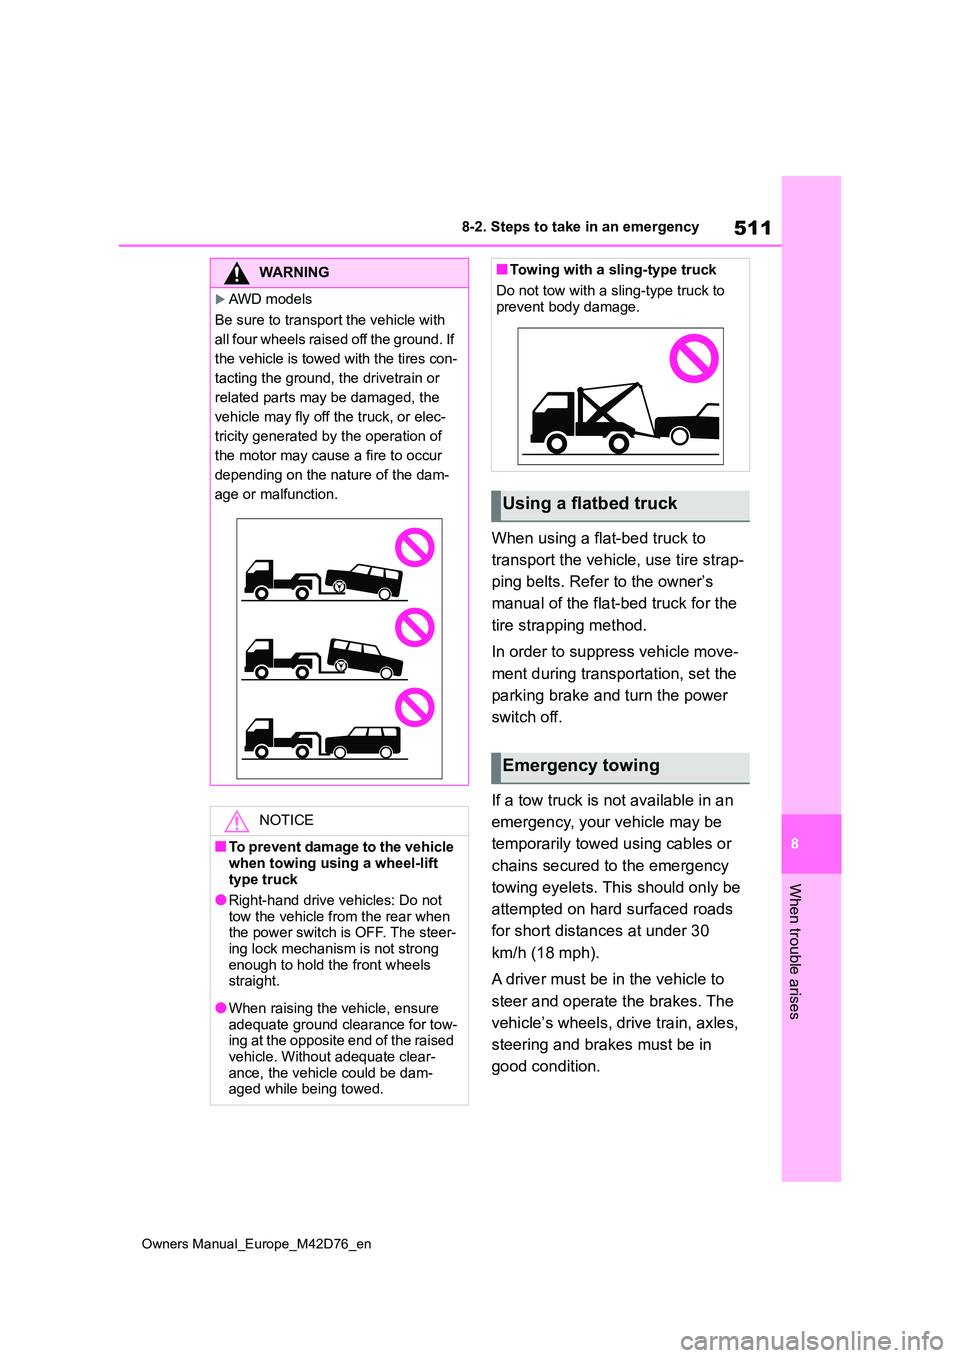 TOYOTA BZ4X 2022   (in English) Service Manual 511
8
Owners Manual_Europe_M42D76_en
8-2. Steps to take in an emergency
When trouble arises
When using a flat-bed truck to  
transport the vehicle, use tire strap- 
ping belts. Refer to the owner’s 